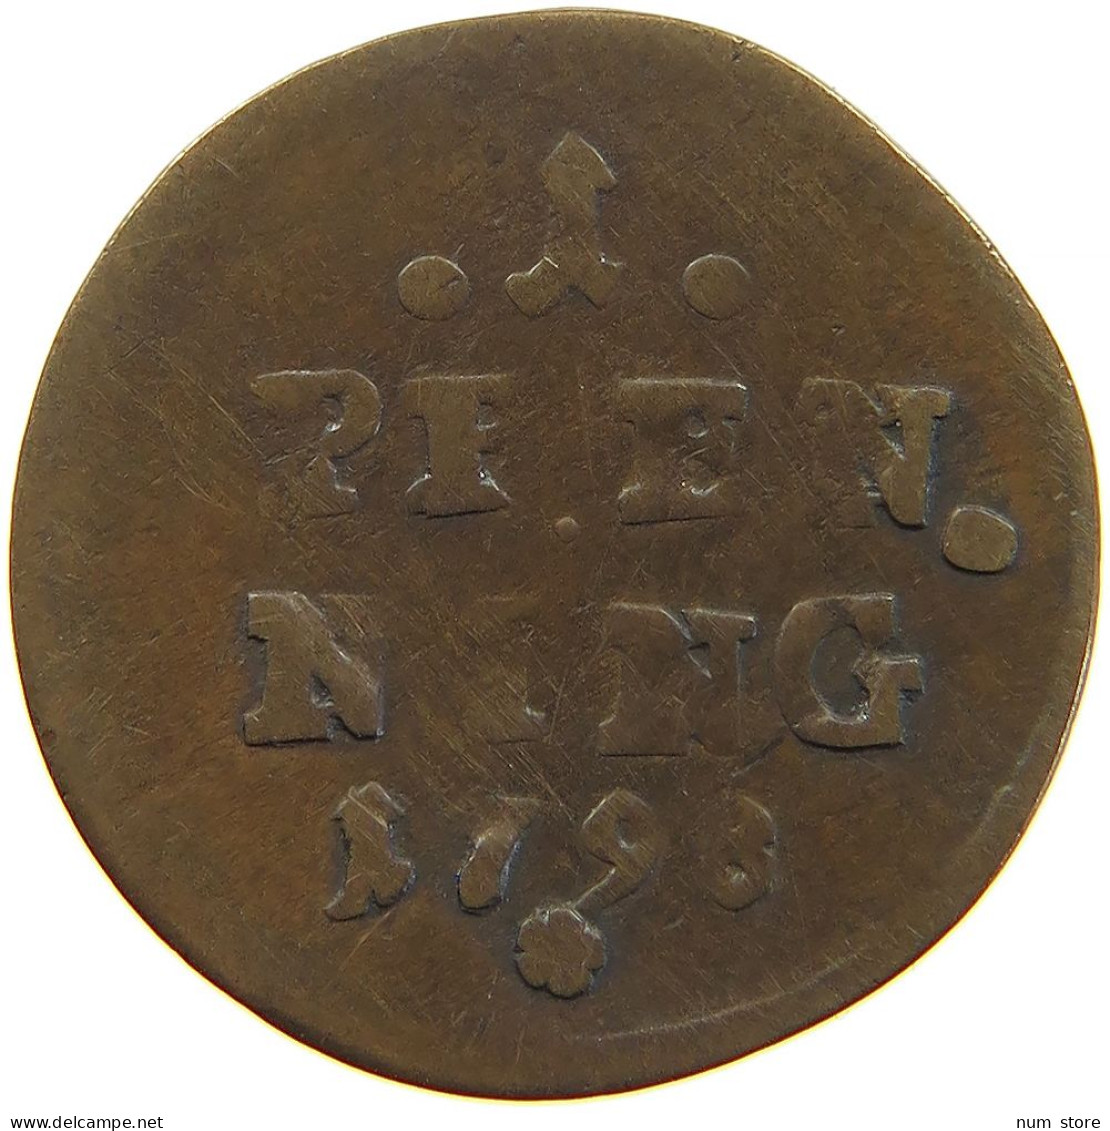 GERMAN STATES 1 PFENNIG 1798 BAYERN Karl Theodor (1777-1799) #t032 1139 - Small Coins & Other Subdivisions